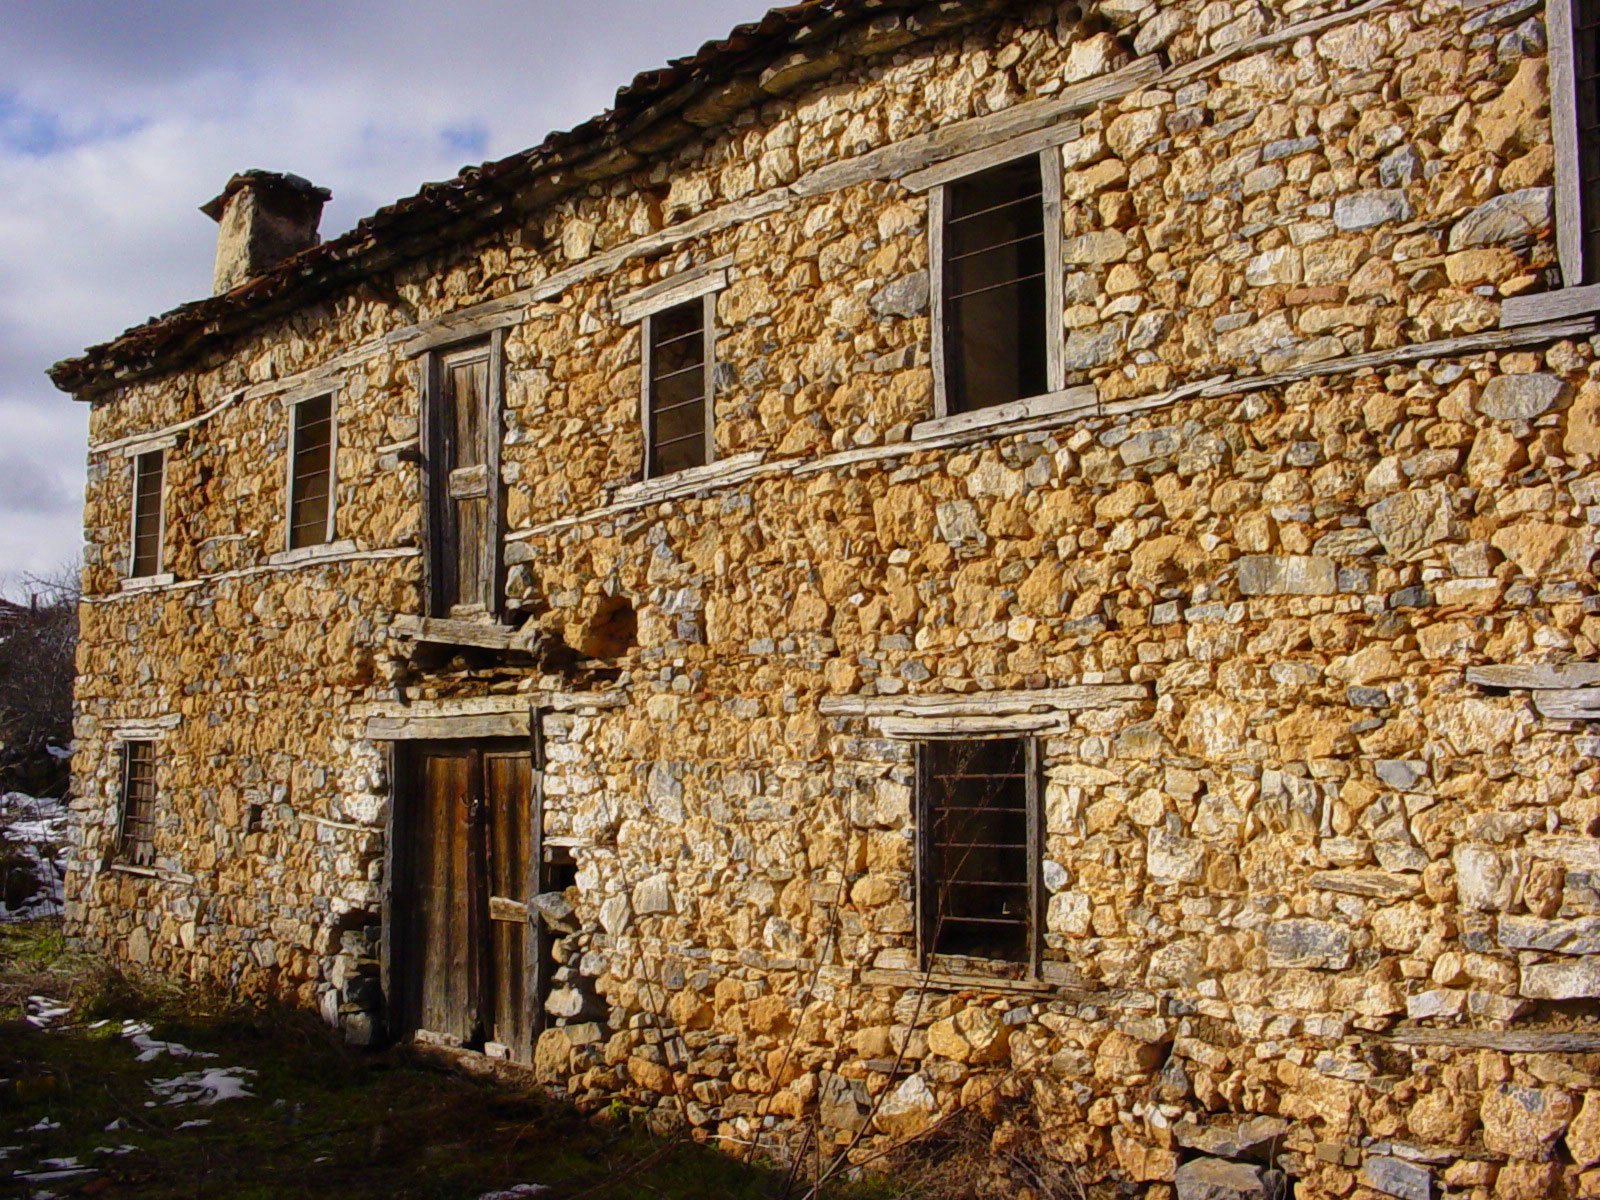 an old, stoned house with broken windows in an old country setting